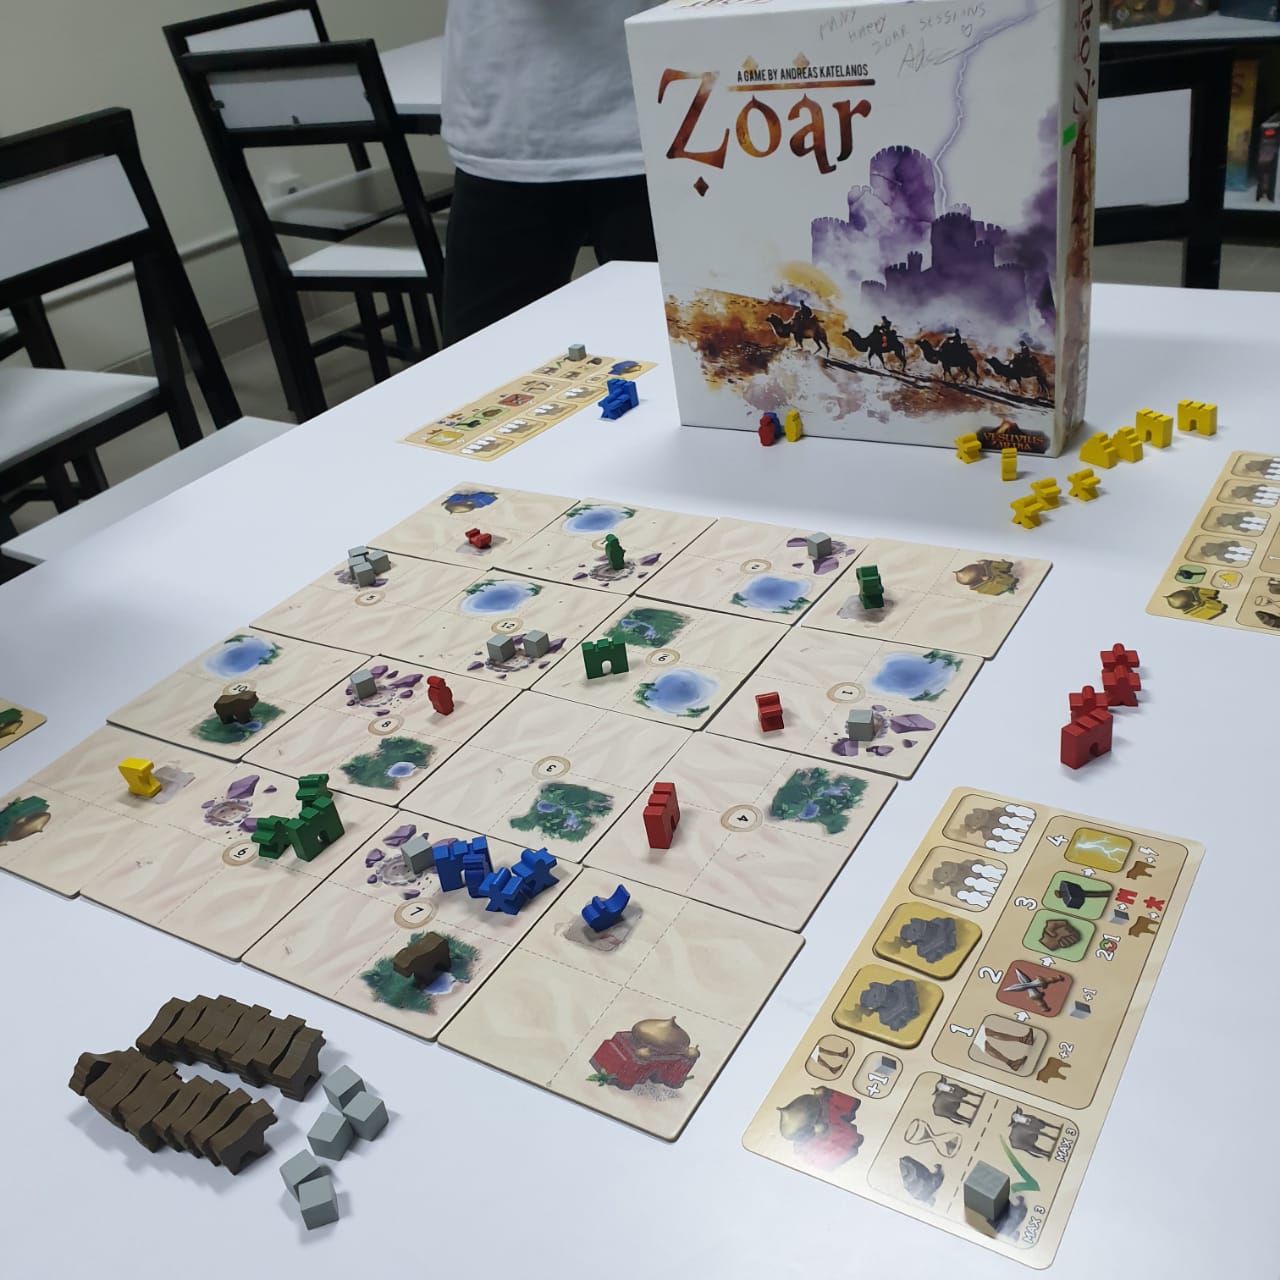 Zoar: Bring the ancient glory or eradicate enemies’ cities [Review]